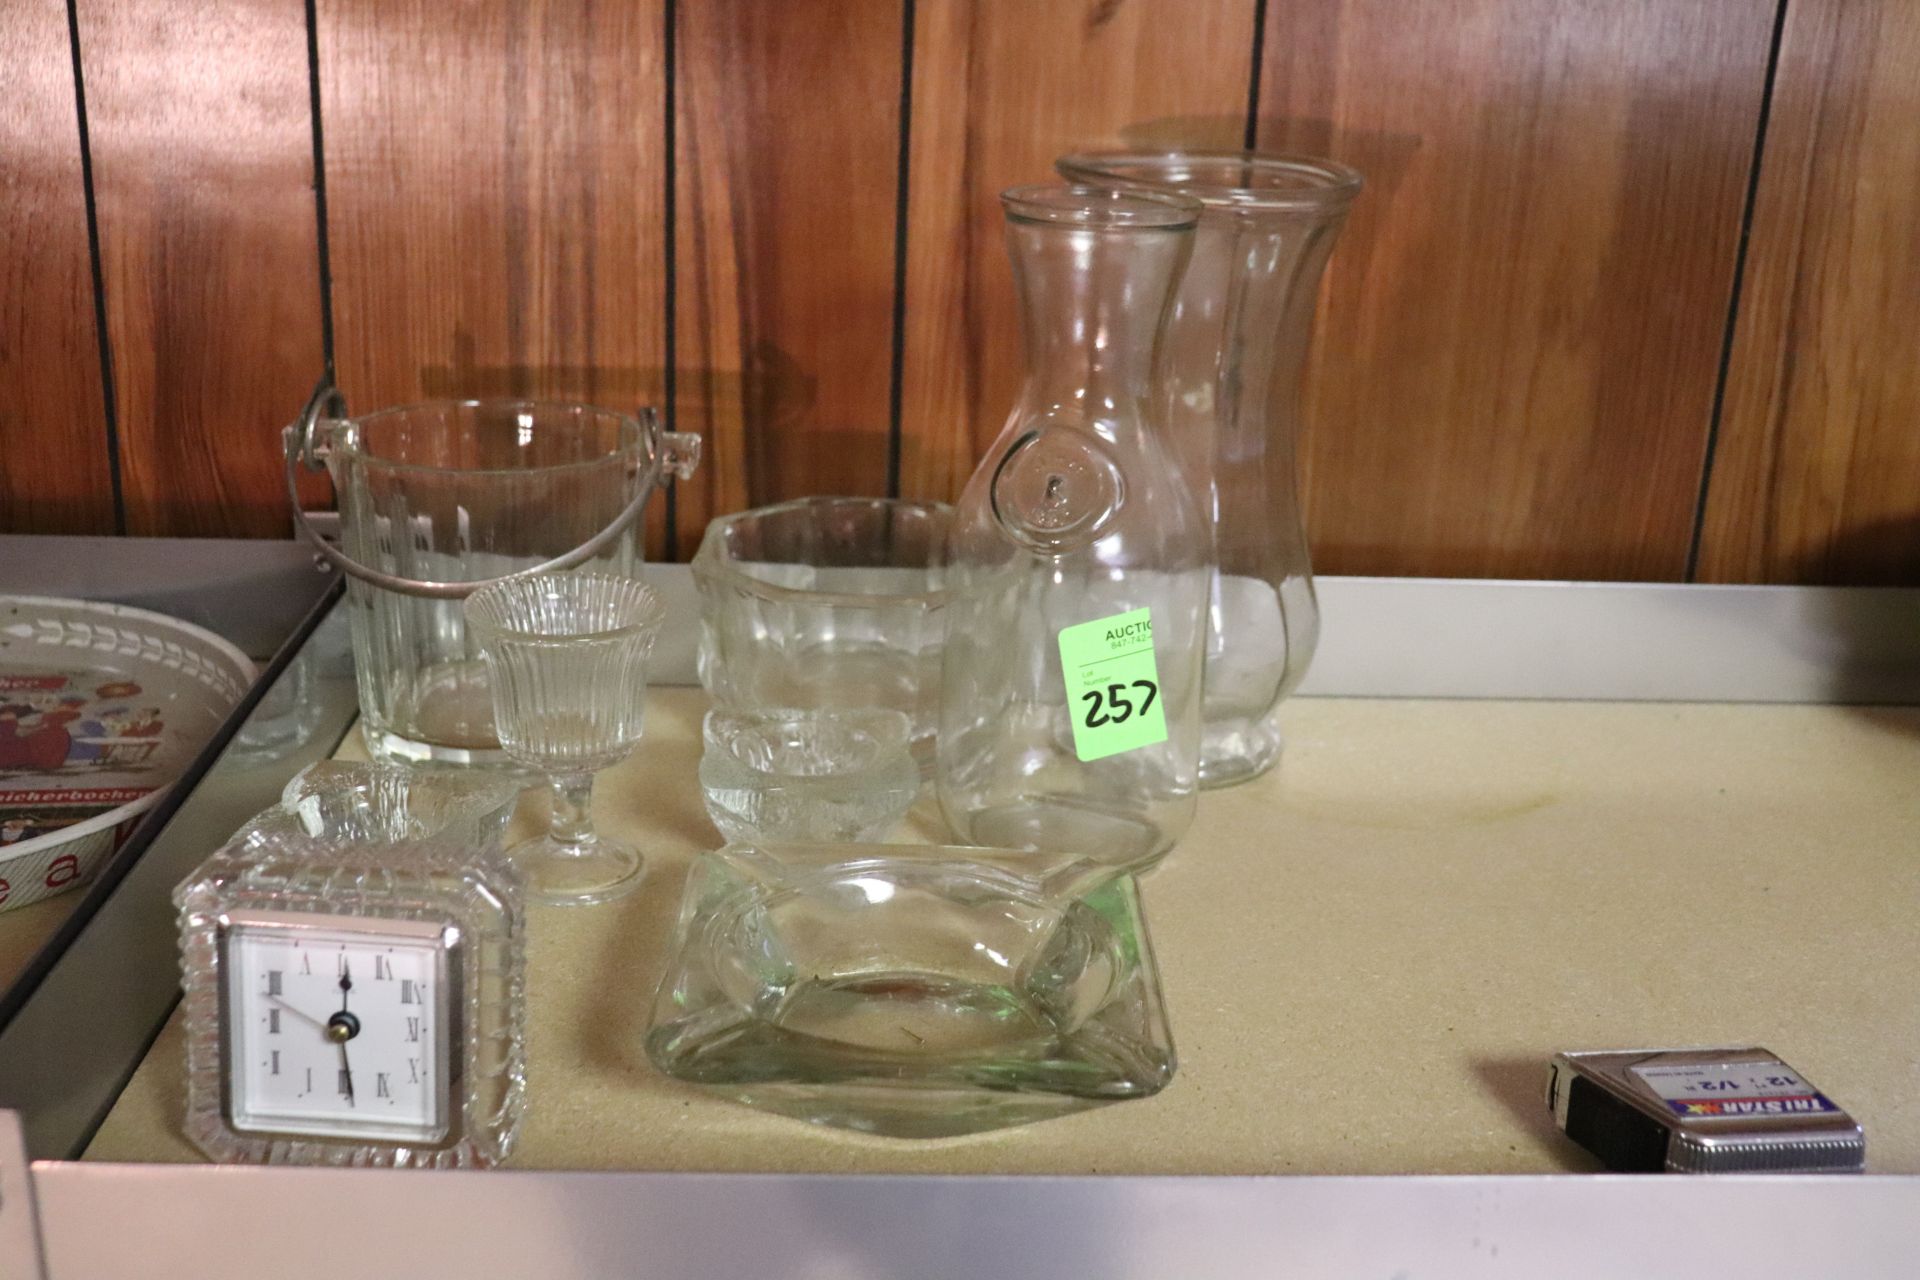 Miscellaneous glassware including milk bottles, ice bucket, ashtray and clock